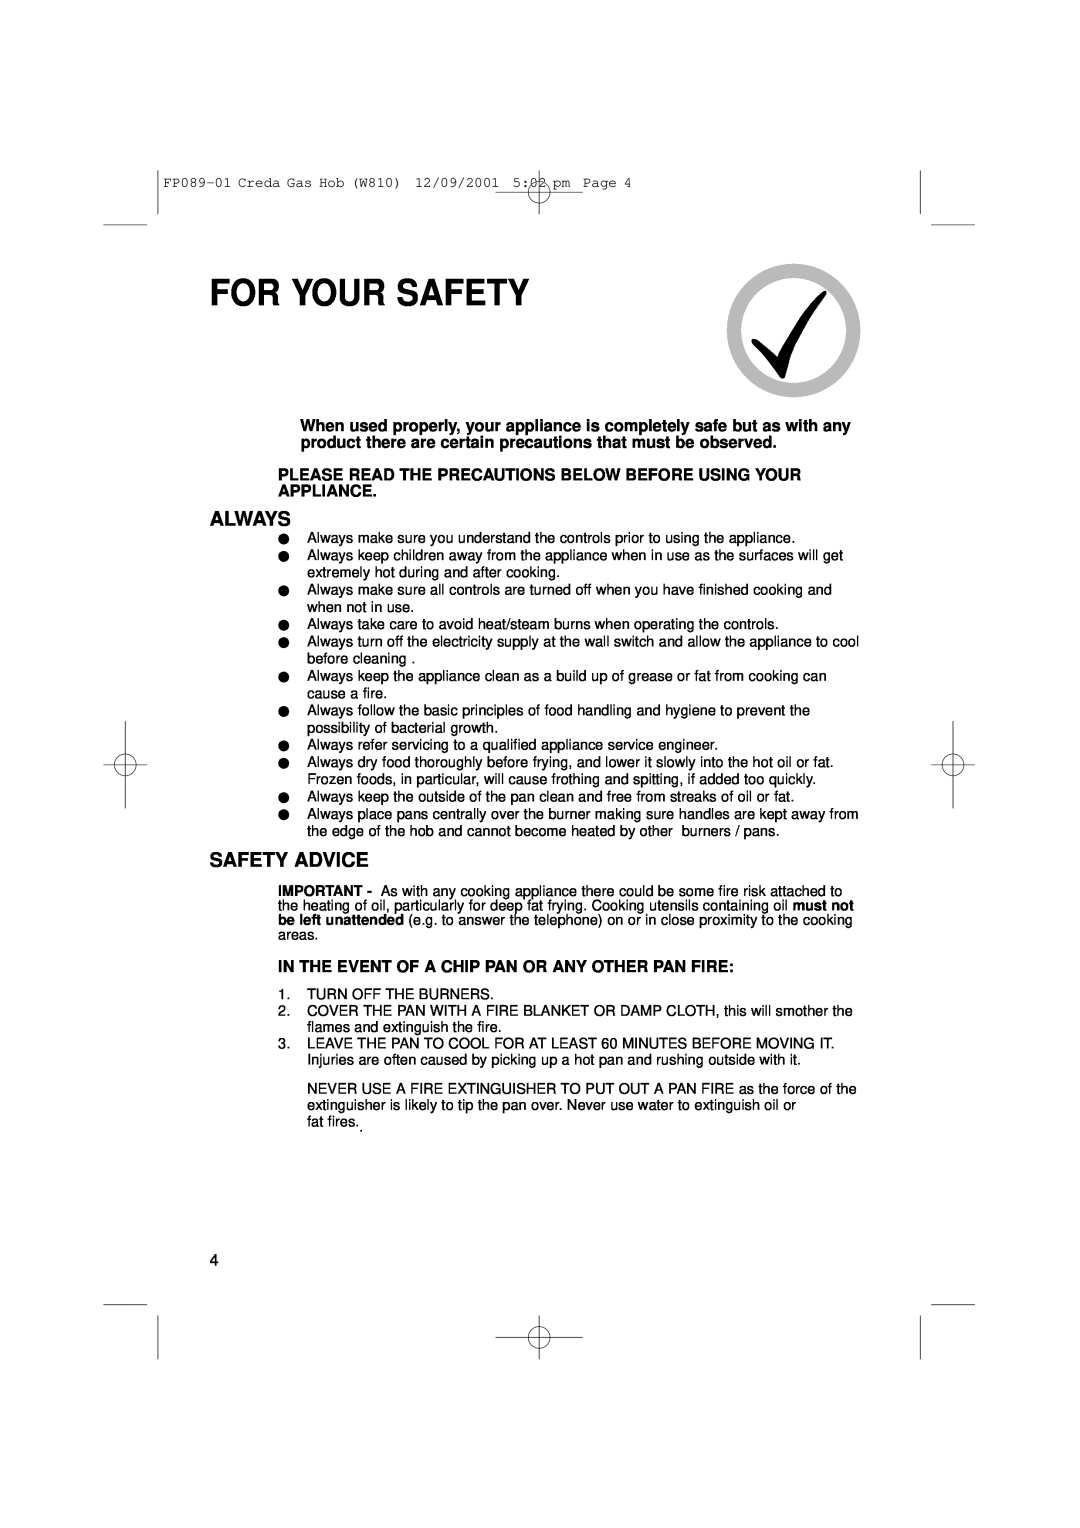 Creda W810 manual For Your Safety, Always, Safety Advice, Please Read The Precautions Below Before Using Your Appliance 